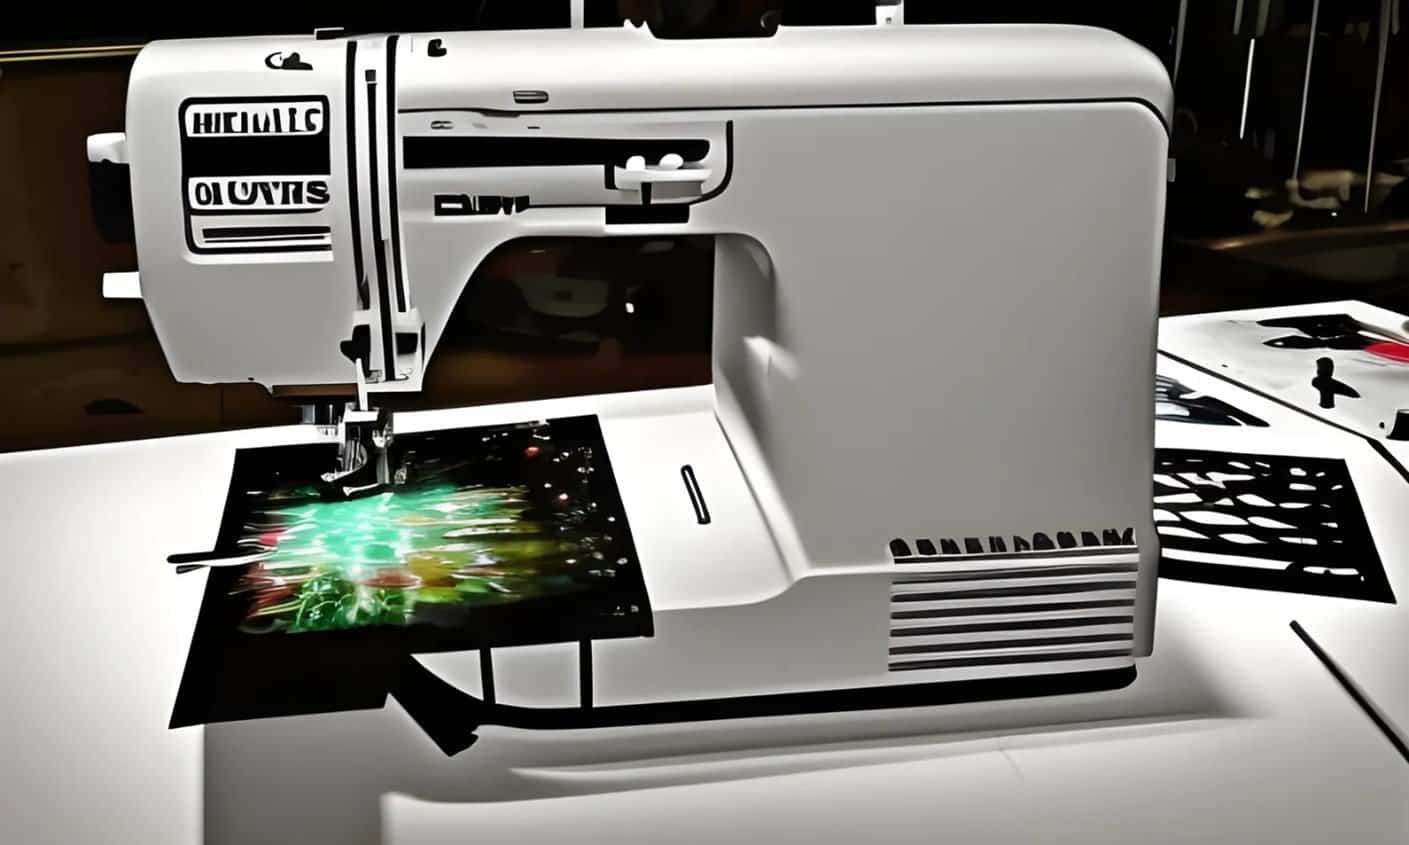 An AI created image of a sewing machine 'sewing' a piece of abstract art.